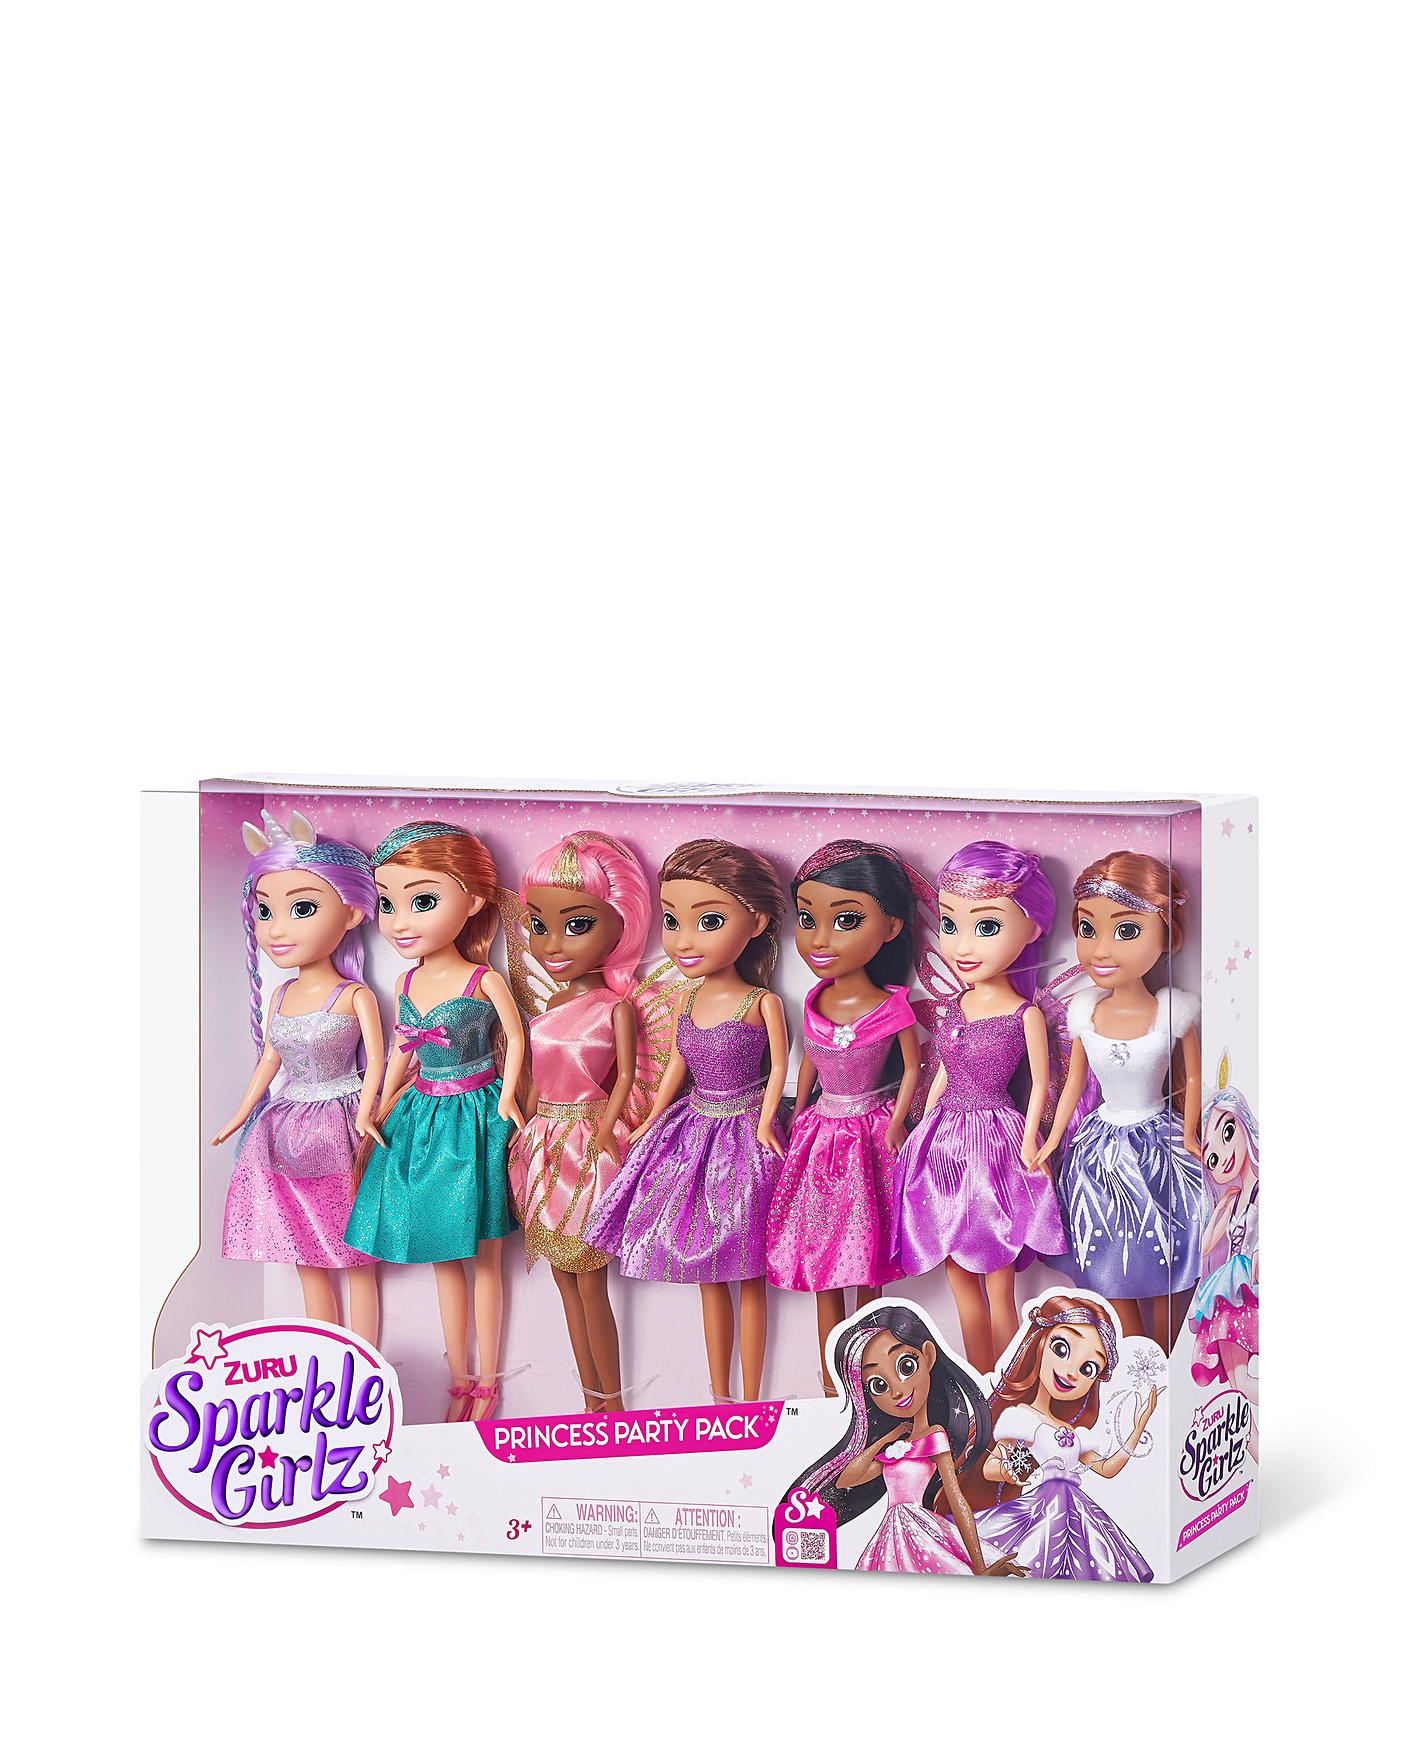 Sparkle Girlz ZURU Little Friends Set of 10 Fashion Dolls For Ages 3 Plus  (styles may vary)